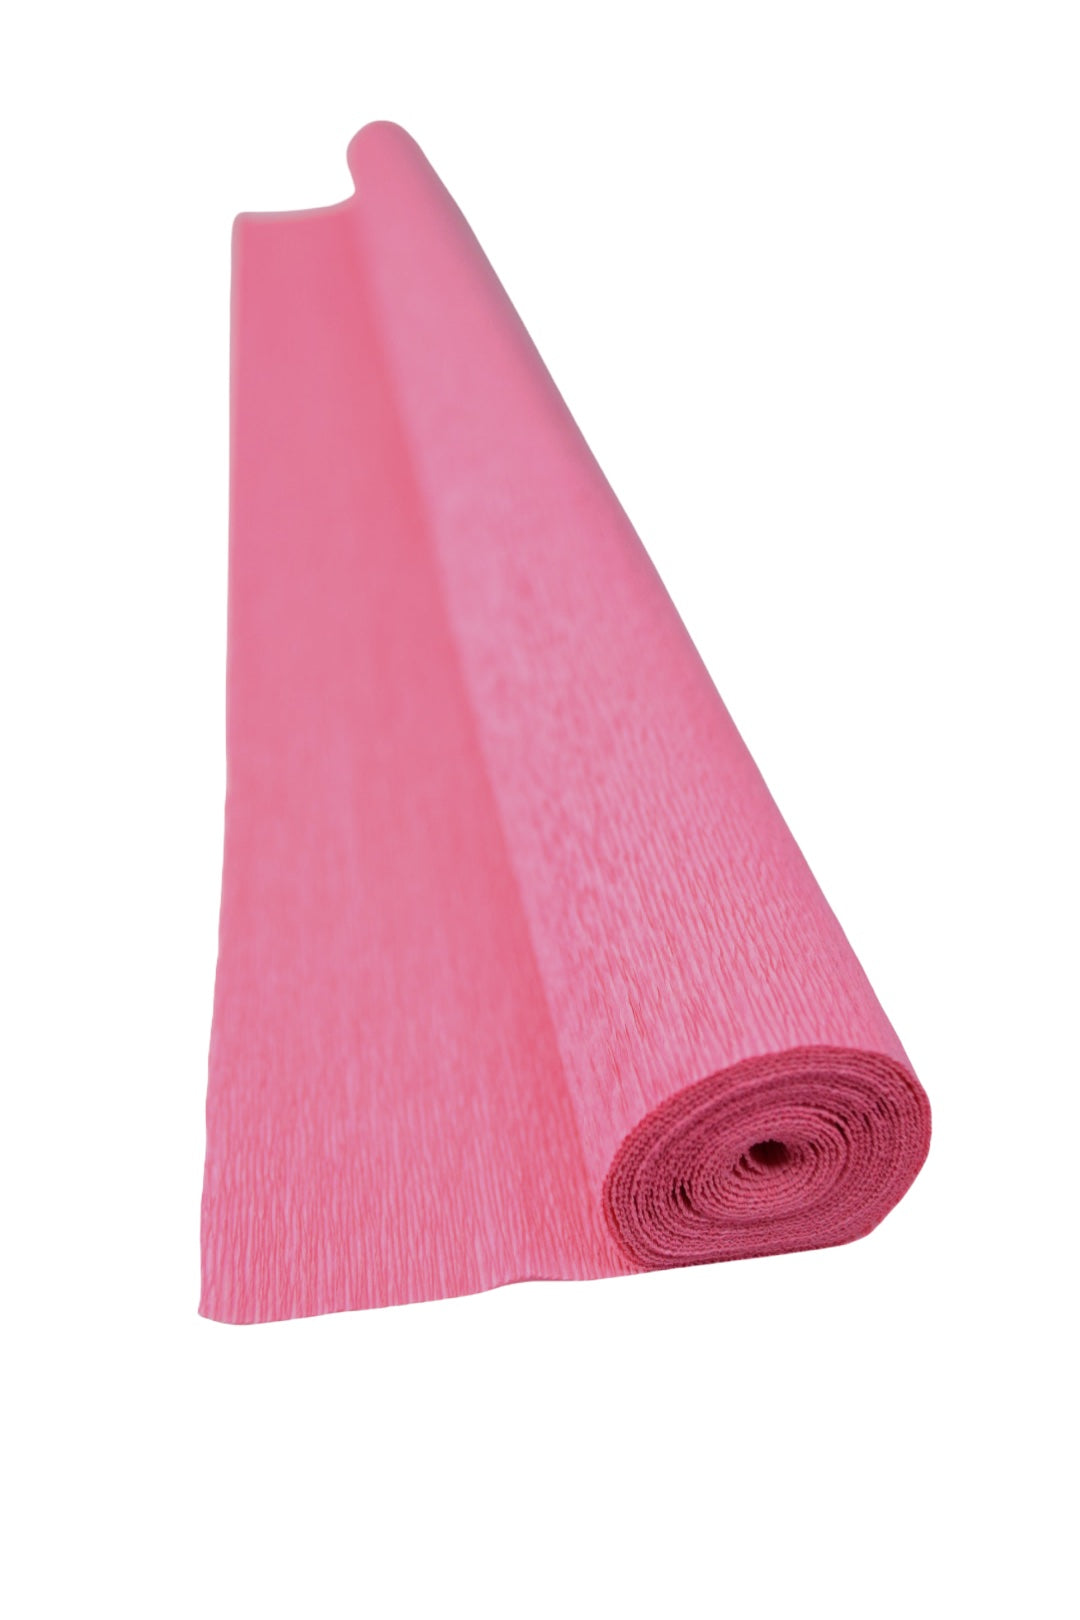 Italian Crepe Paper 180g 550 Antico Pink – Flowers With a Secret